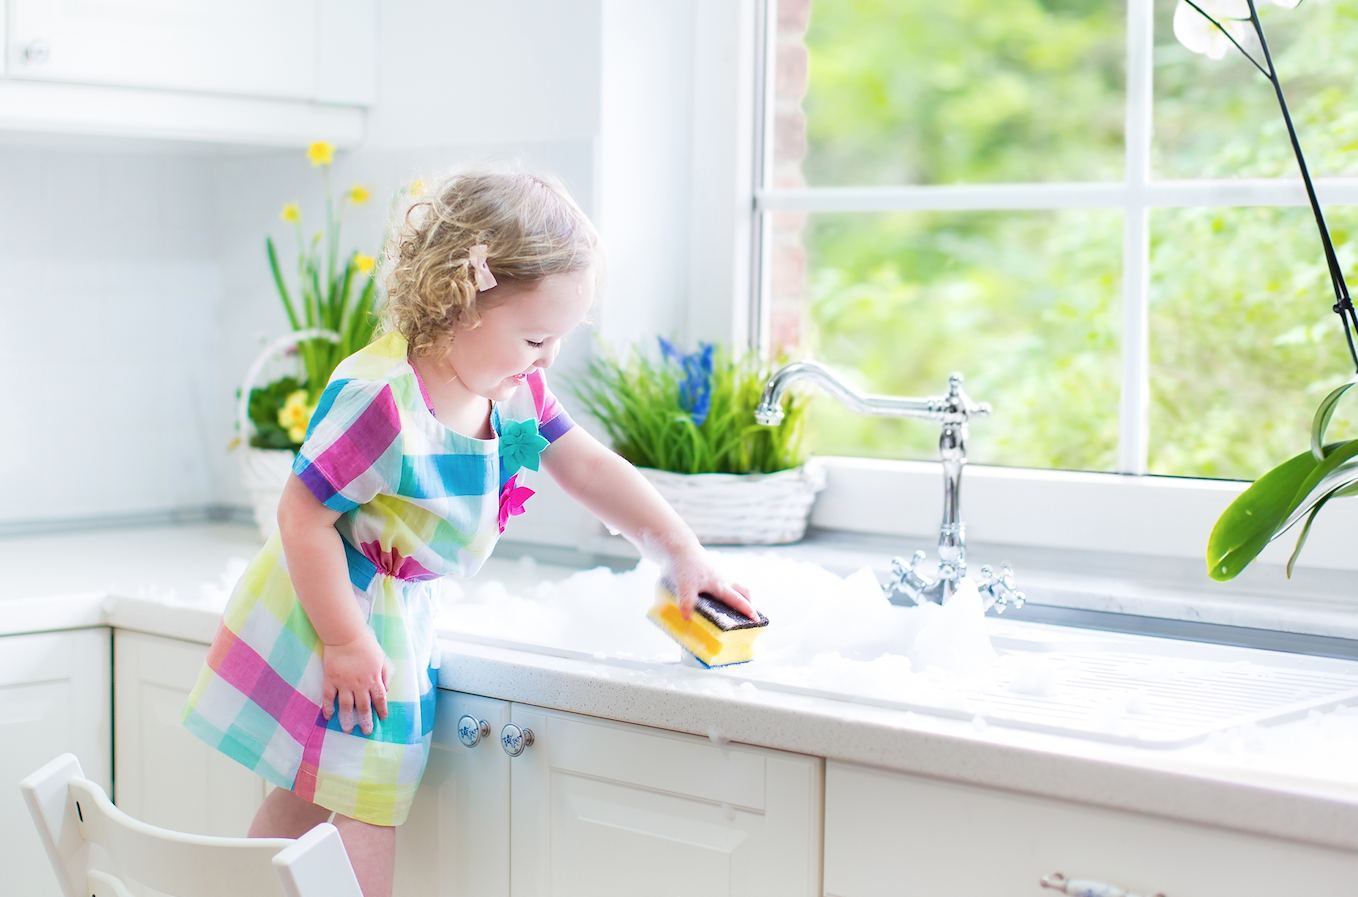 Our Top 8 Tips to Prepare Your Home for Summer